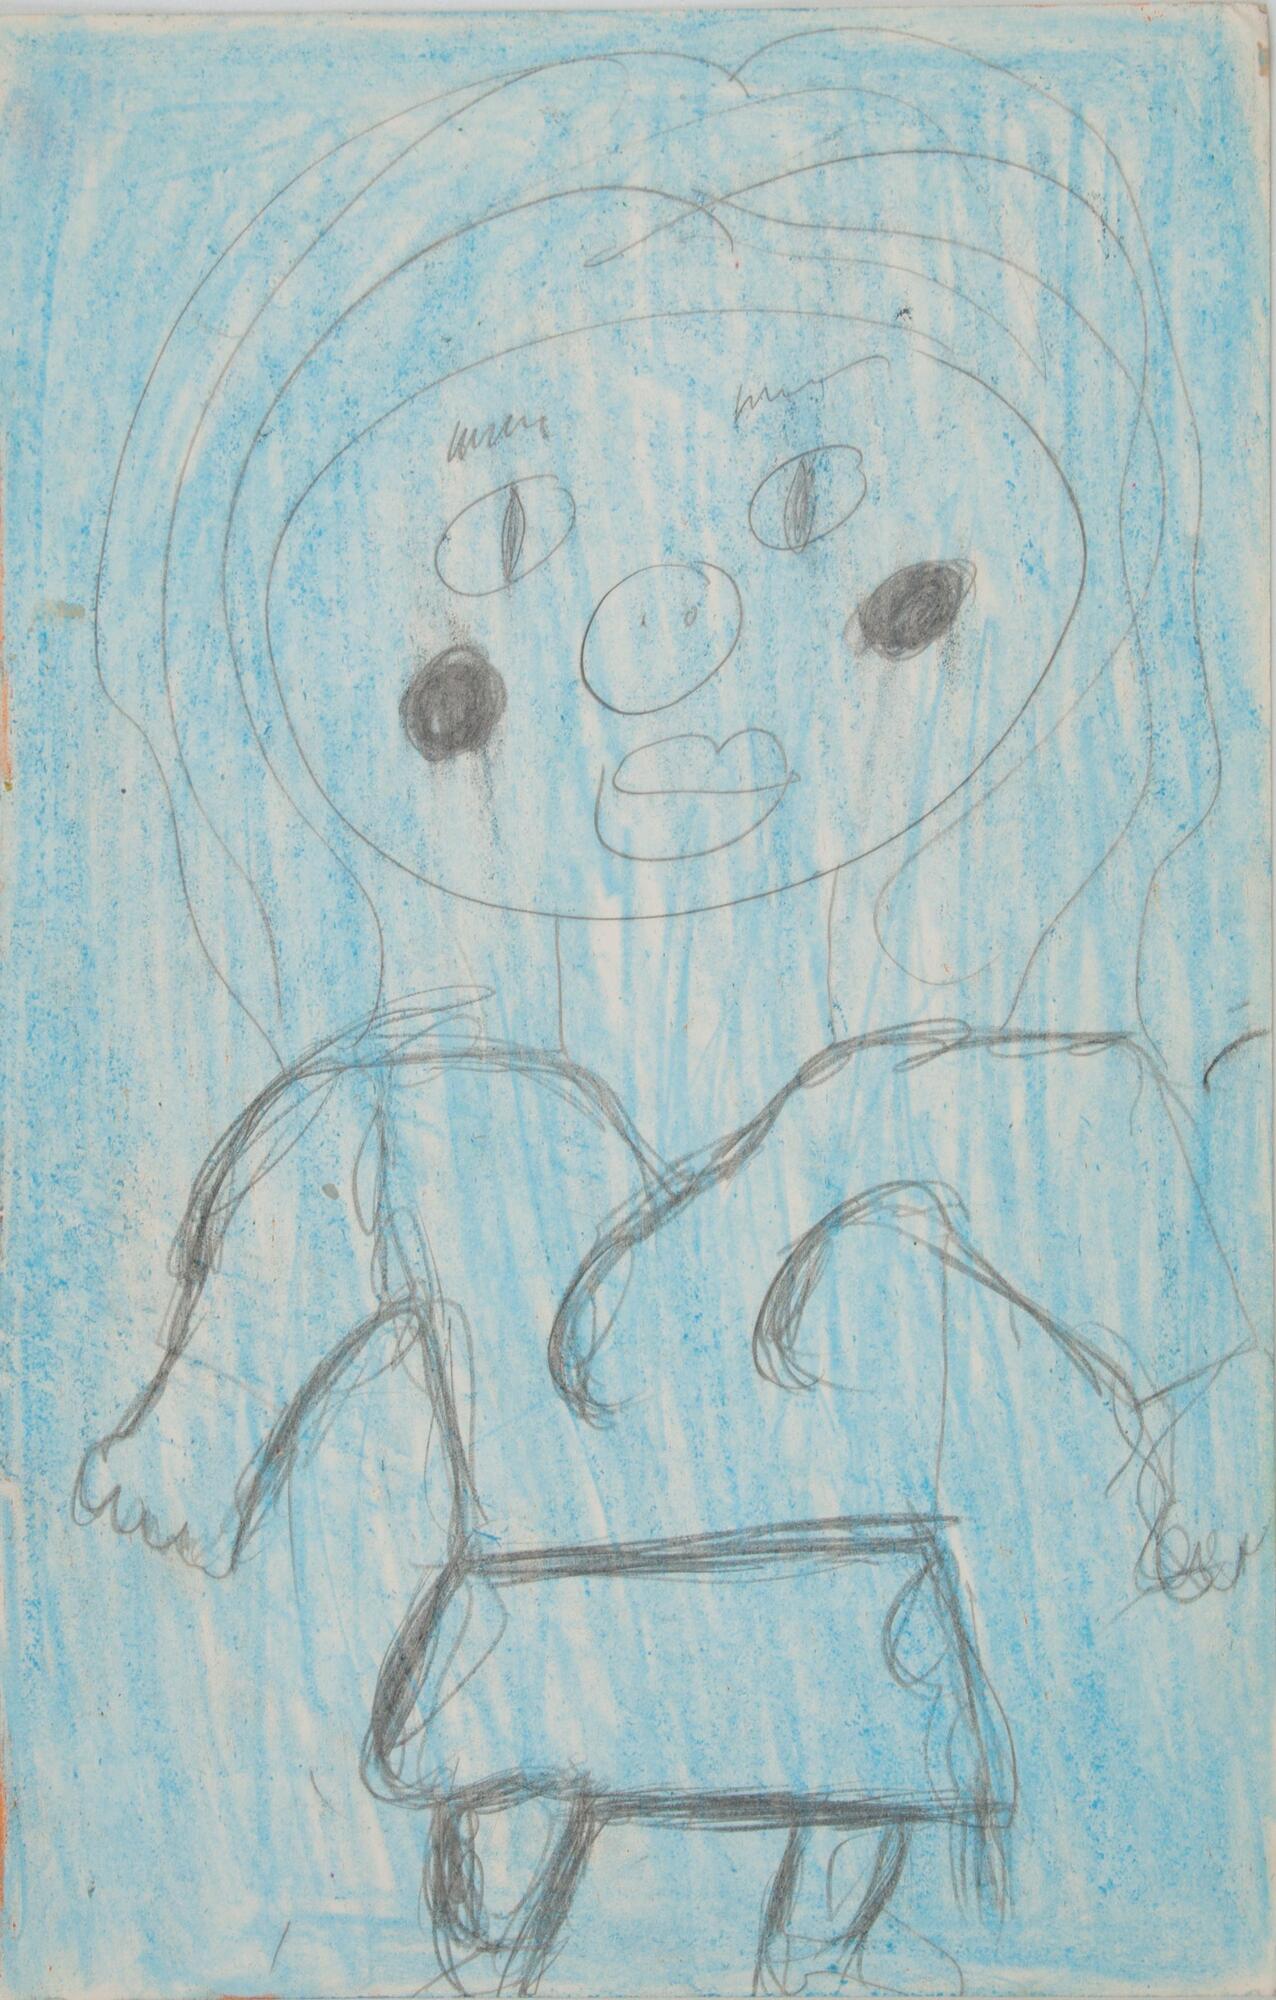 At the center of the drawing is a woman, drawn in pencil. There is an orange edge on the left side, with light blue crayon colored overall. The woman has dark circles for cheeks, in pencil, and is wearing a shirt and skirt. Created on reused paper, the paper is glossy on the back and matte on the front.